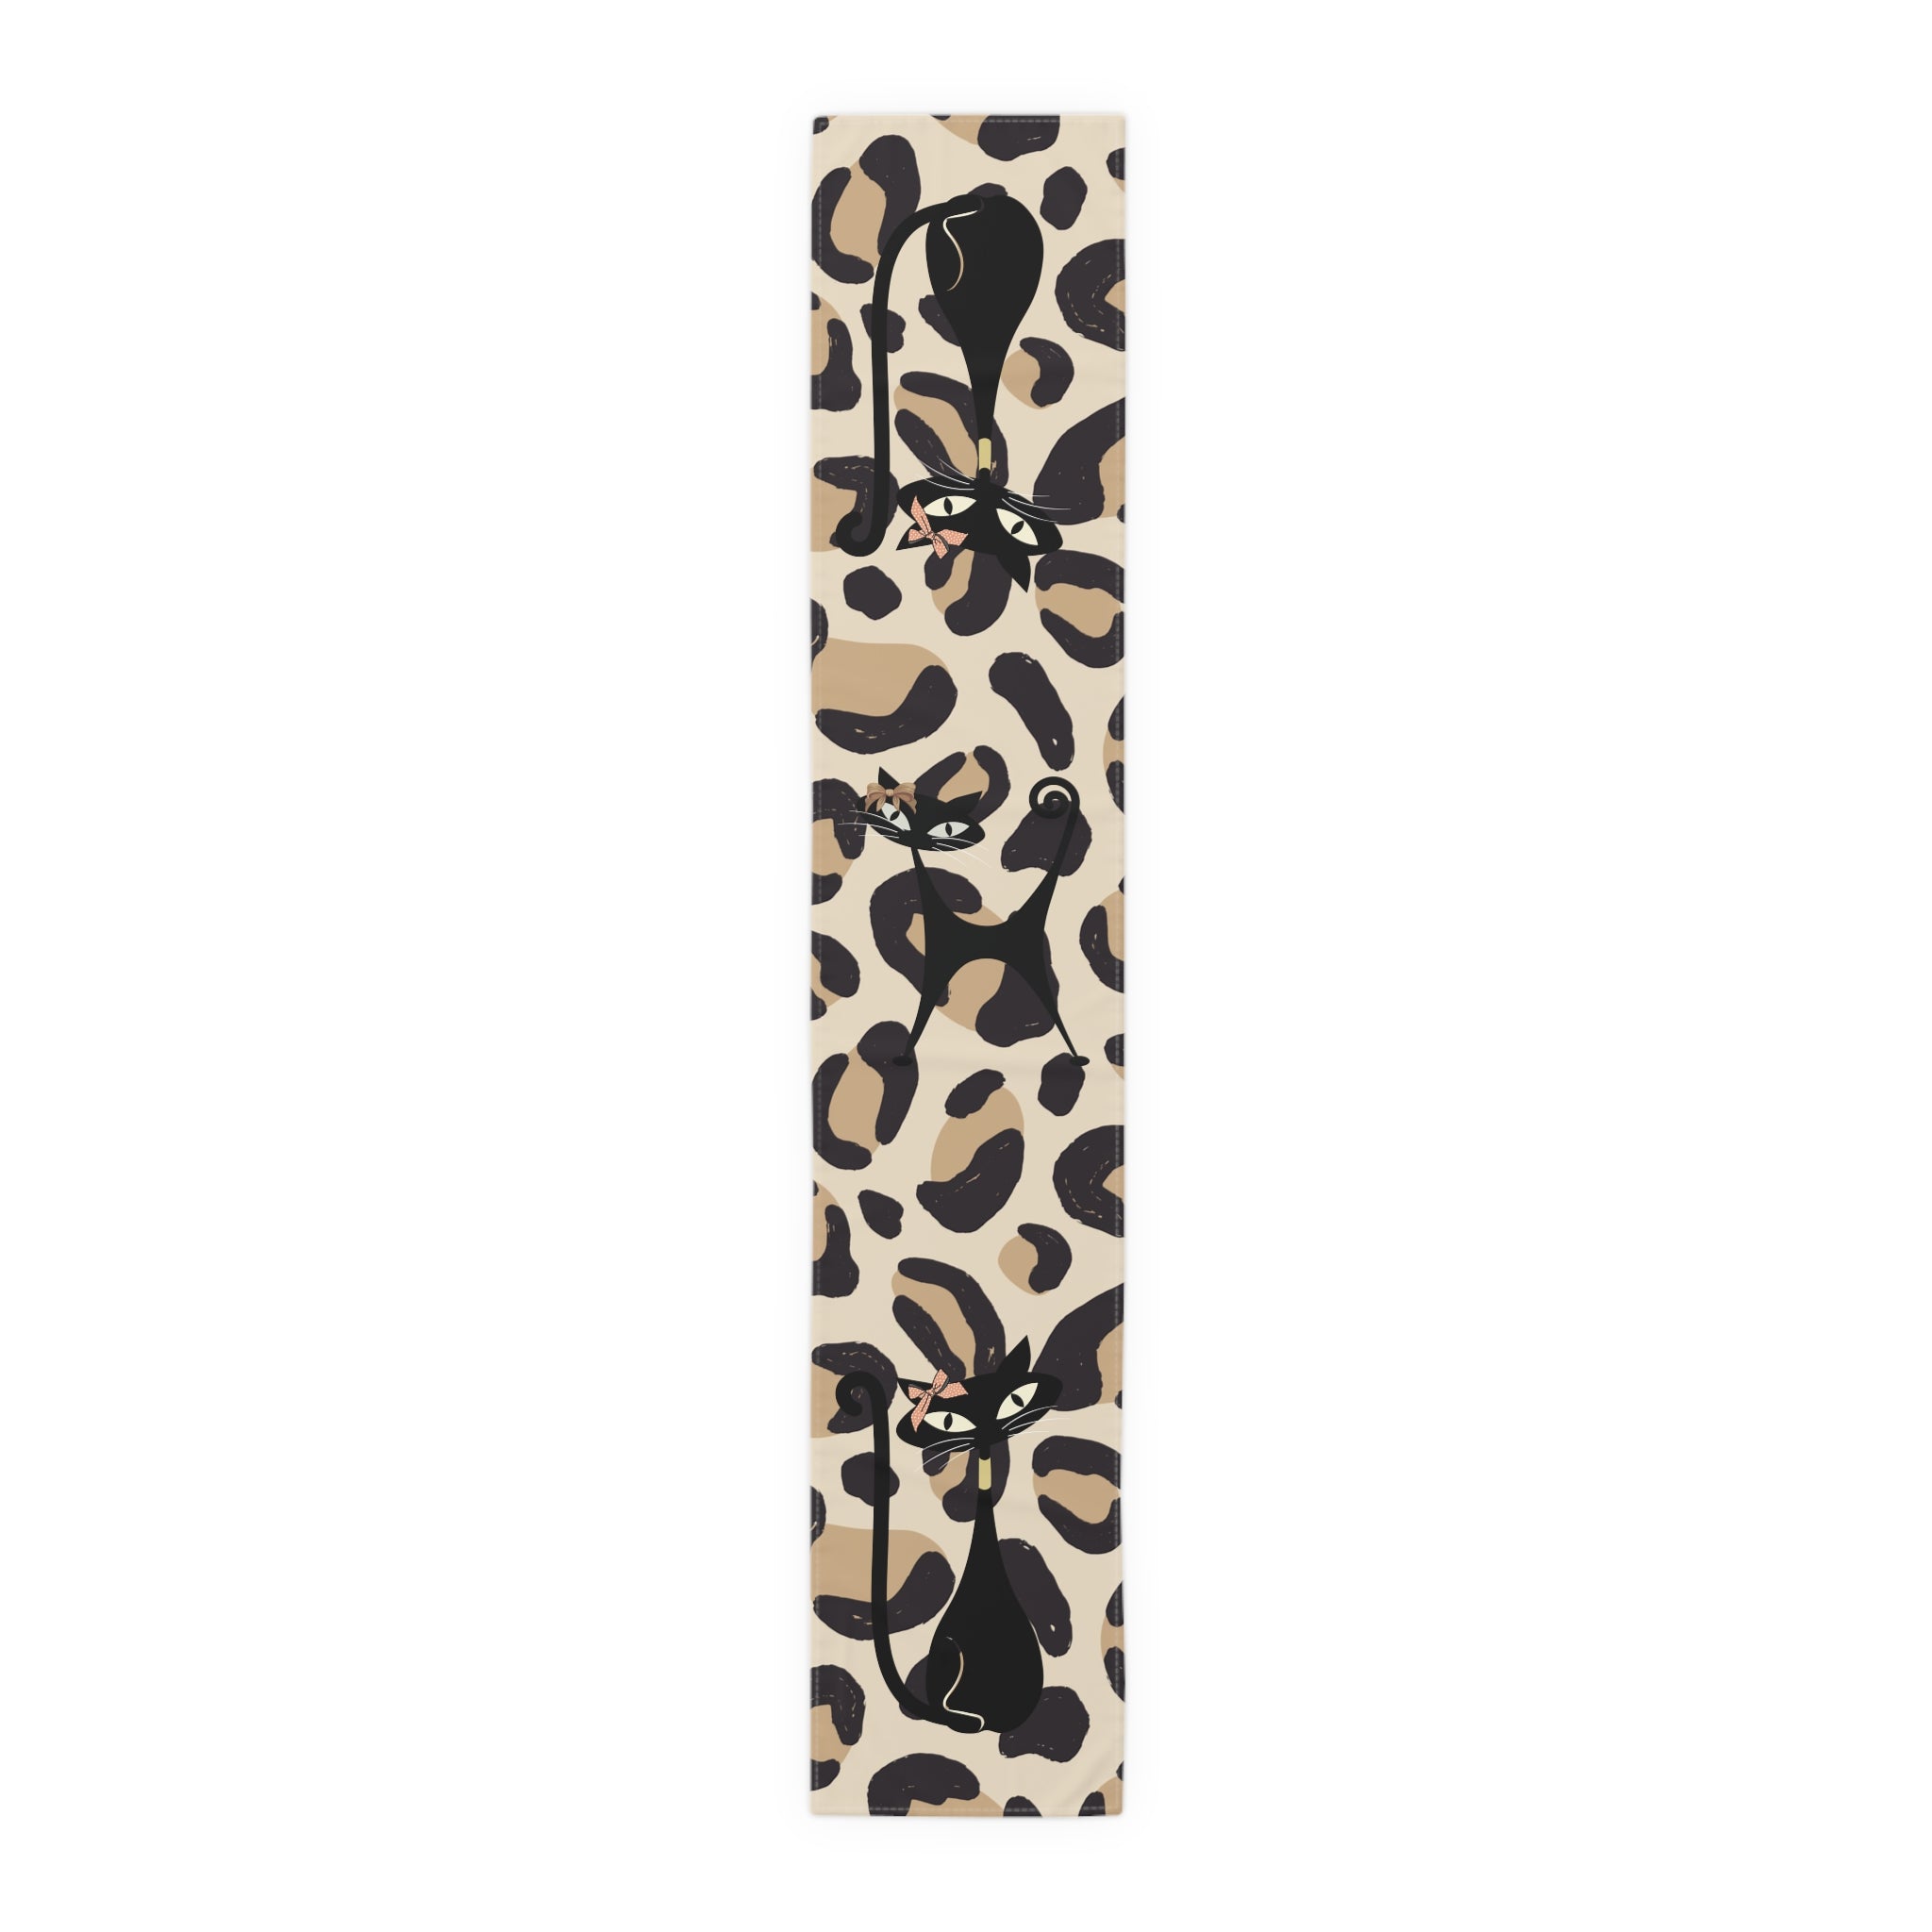 Atomic Cat Leopard Print Boujee Dining Room, Kitchen, Sideboard, Mid Mod Table Runner